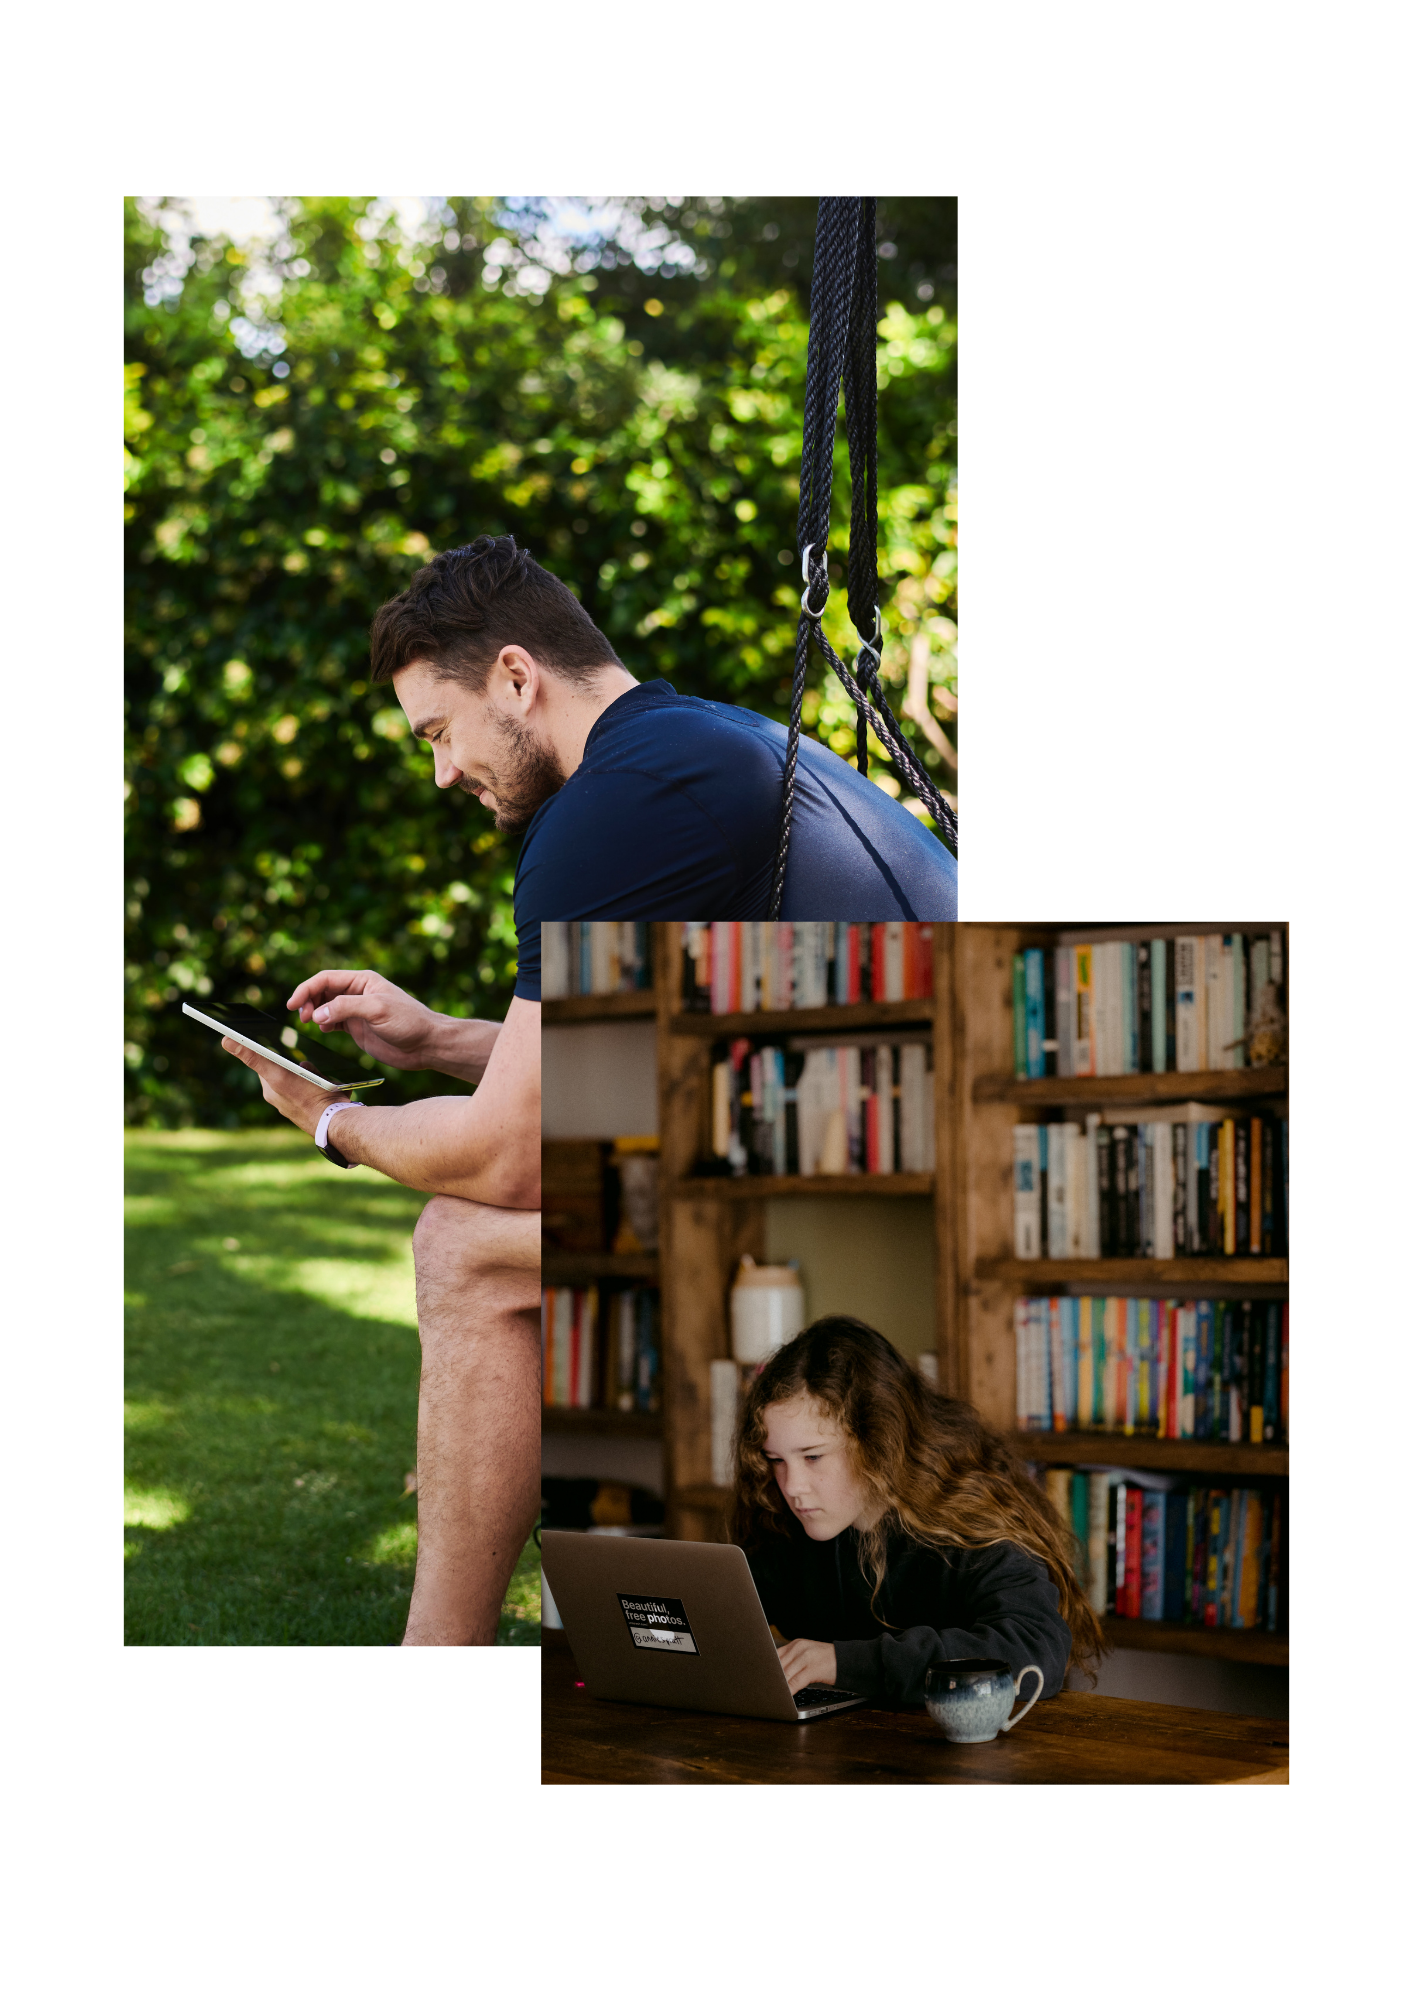 11Two photos - one of a young guy outside on a bench looking at a tablet and another picture of a girl in a library looking at a laptop